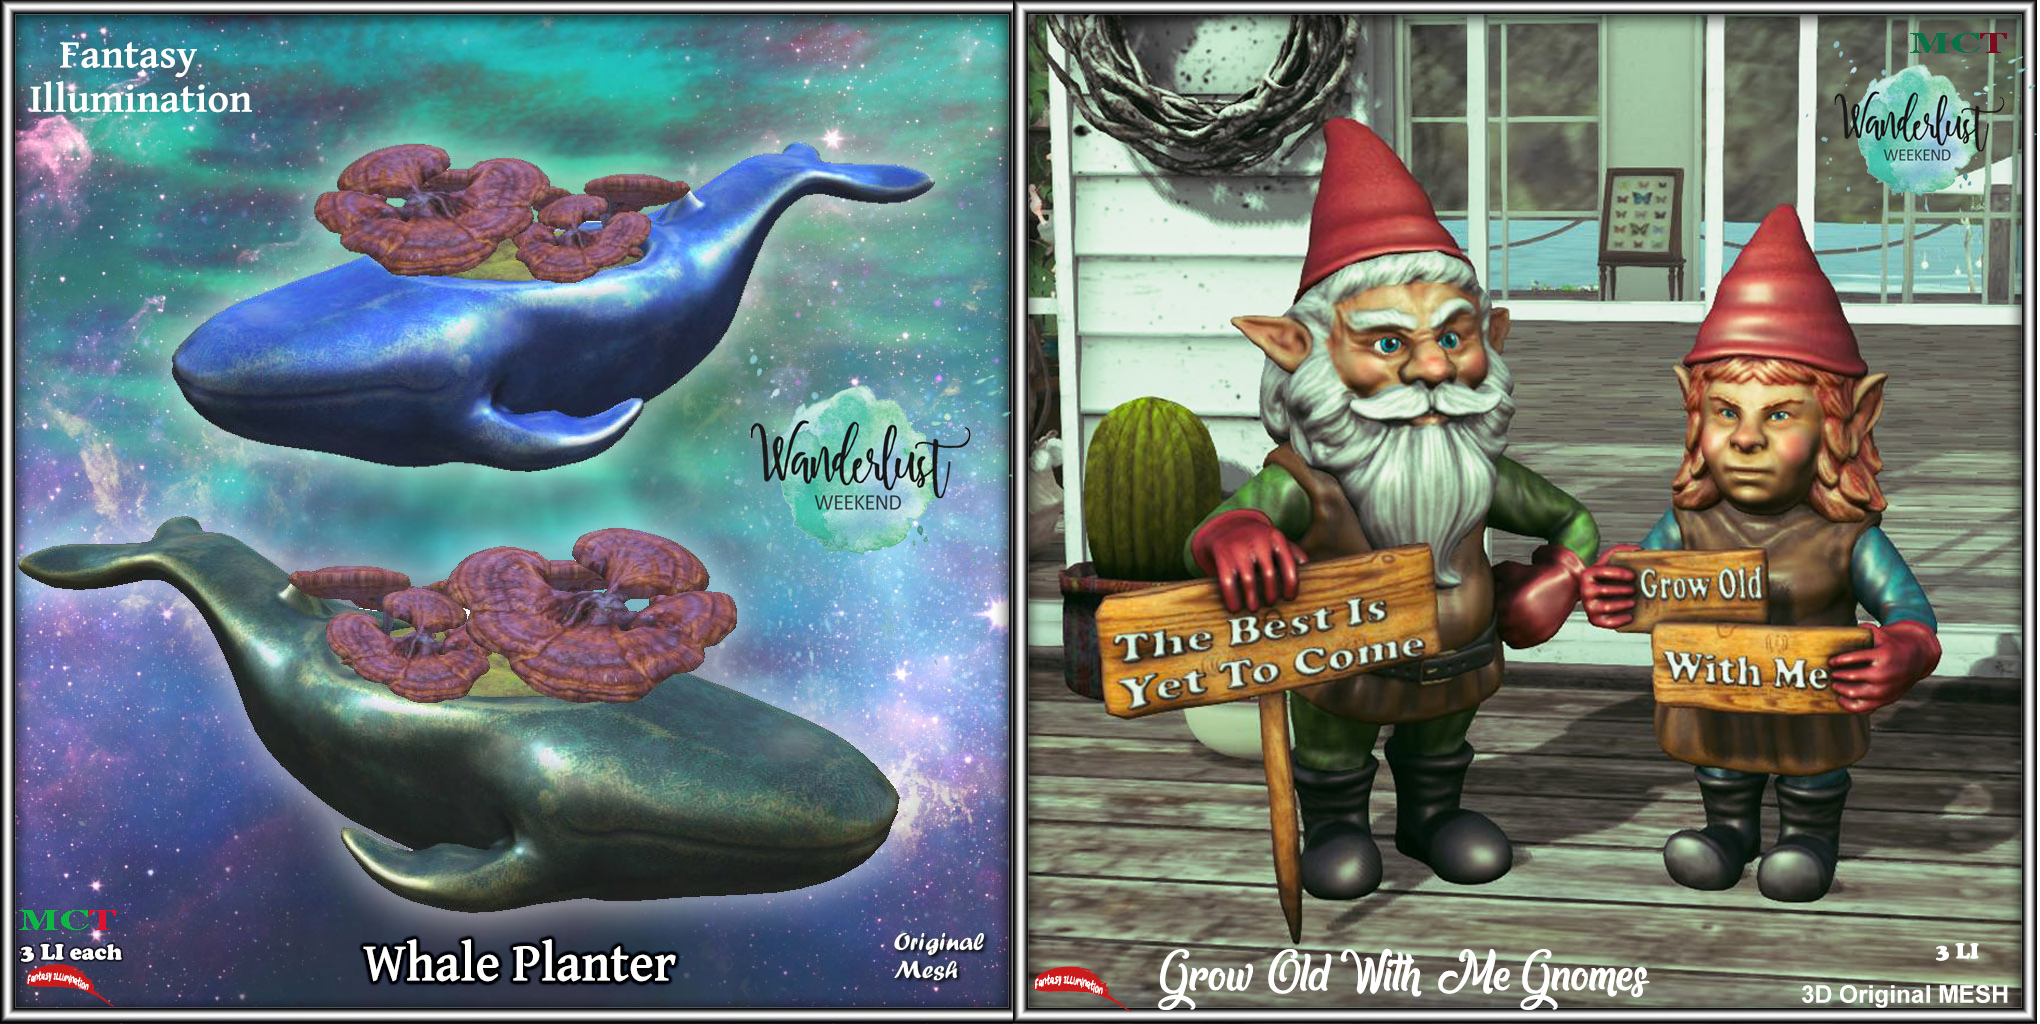 Fantasy Illumination – Whale Planter & Grow Old With Me Gnomes